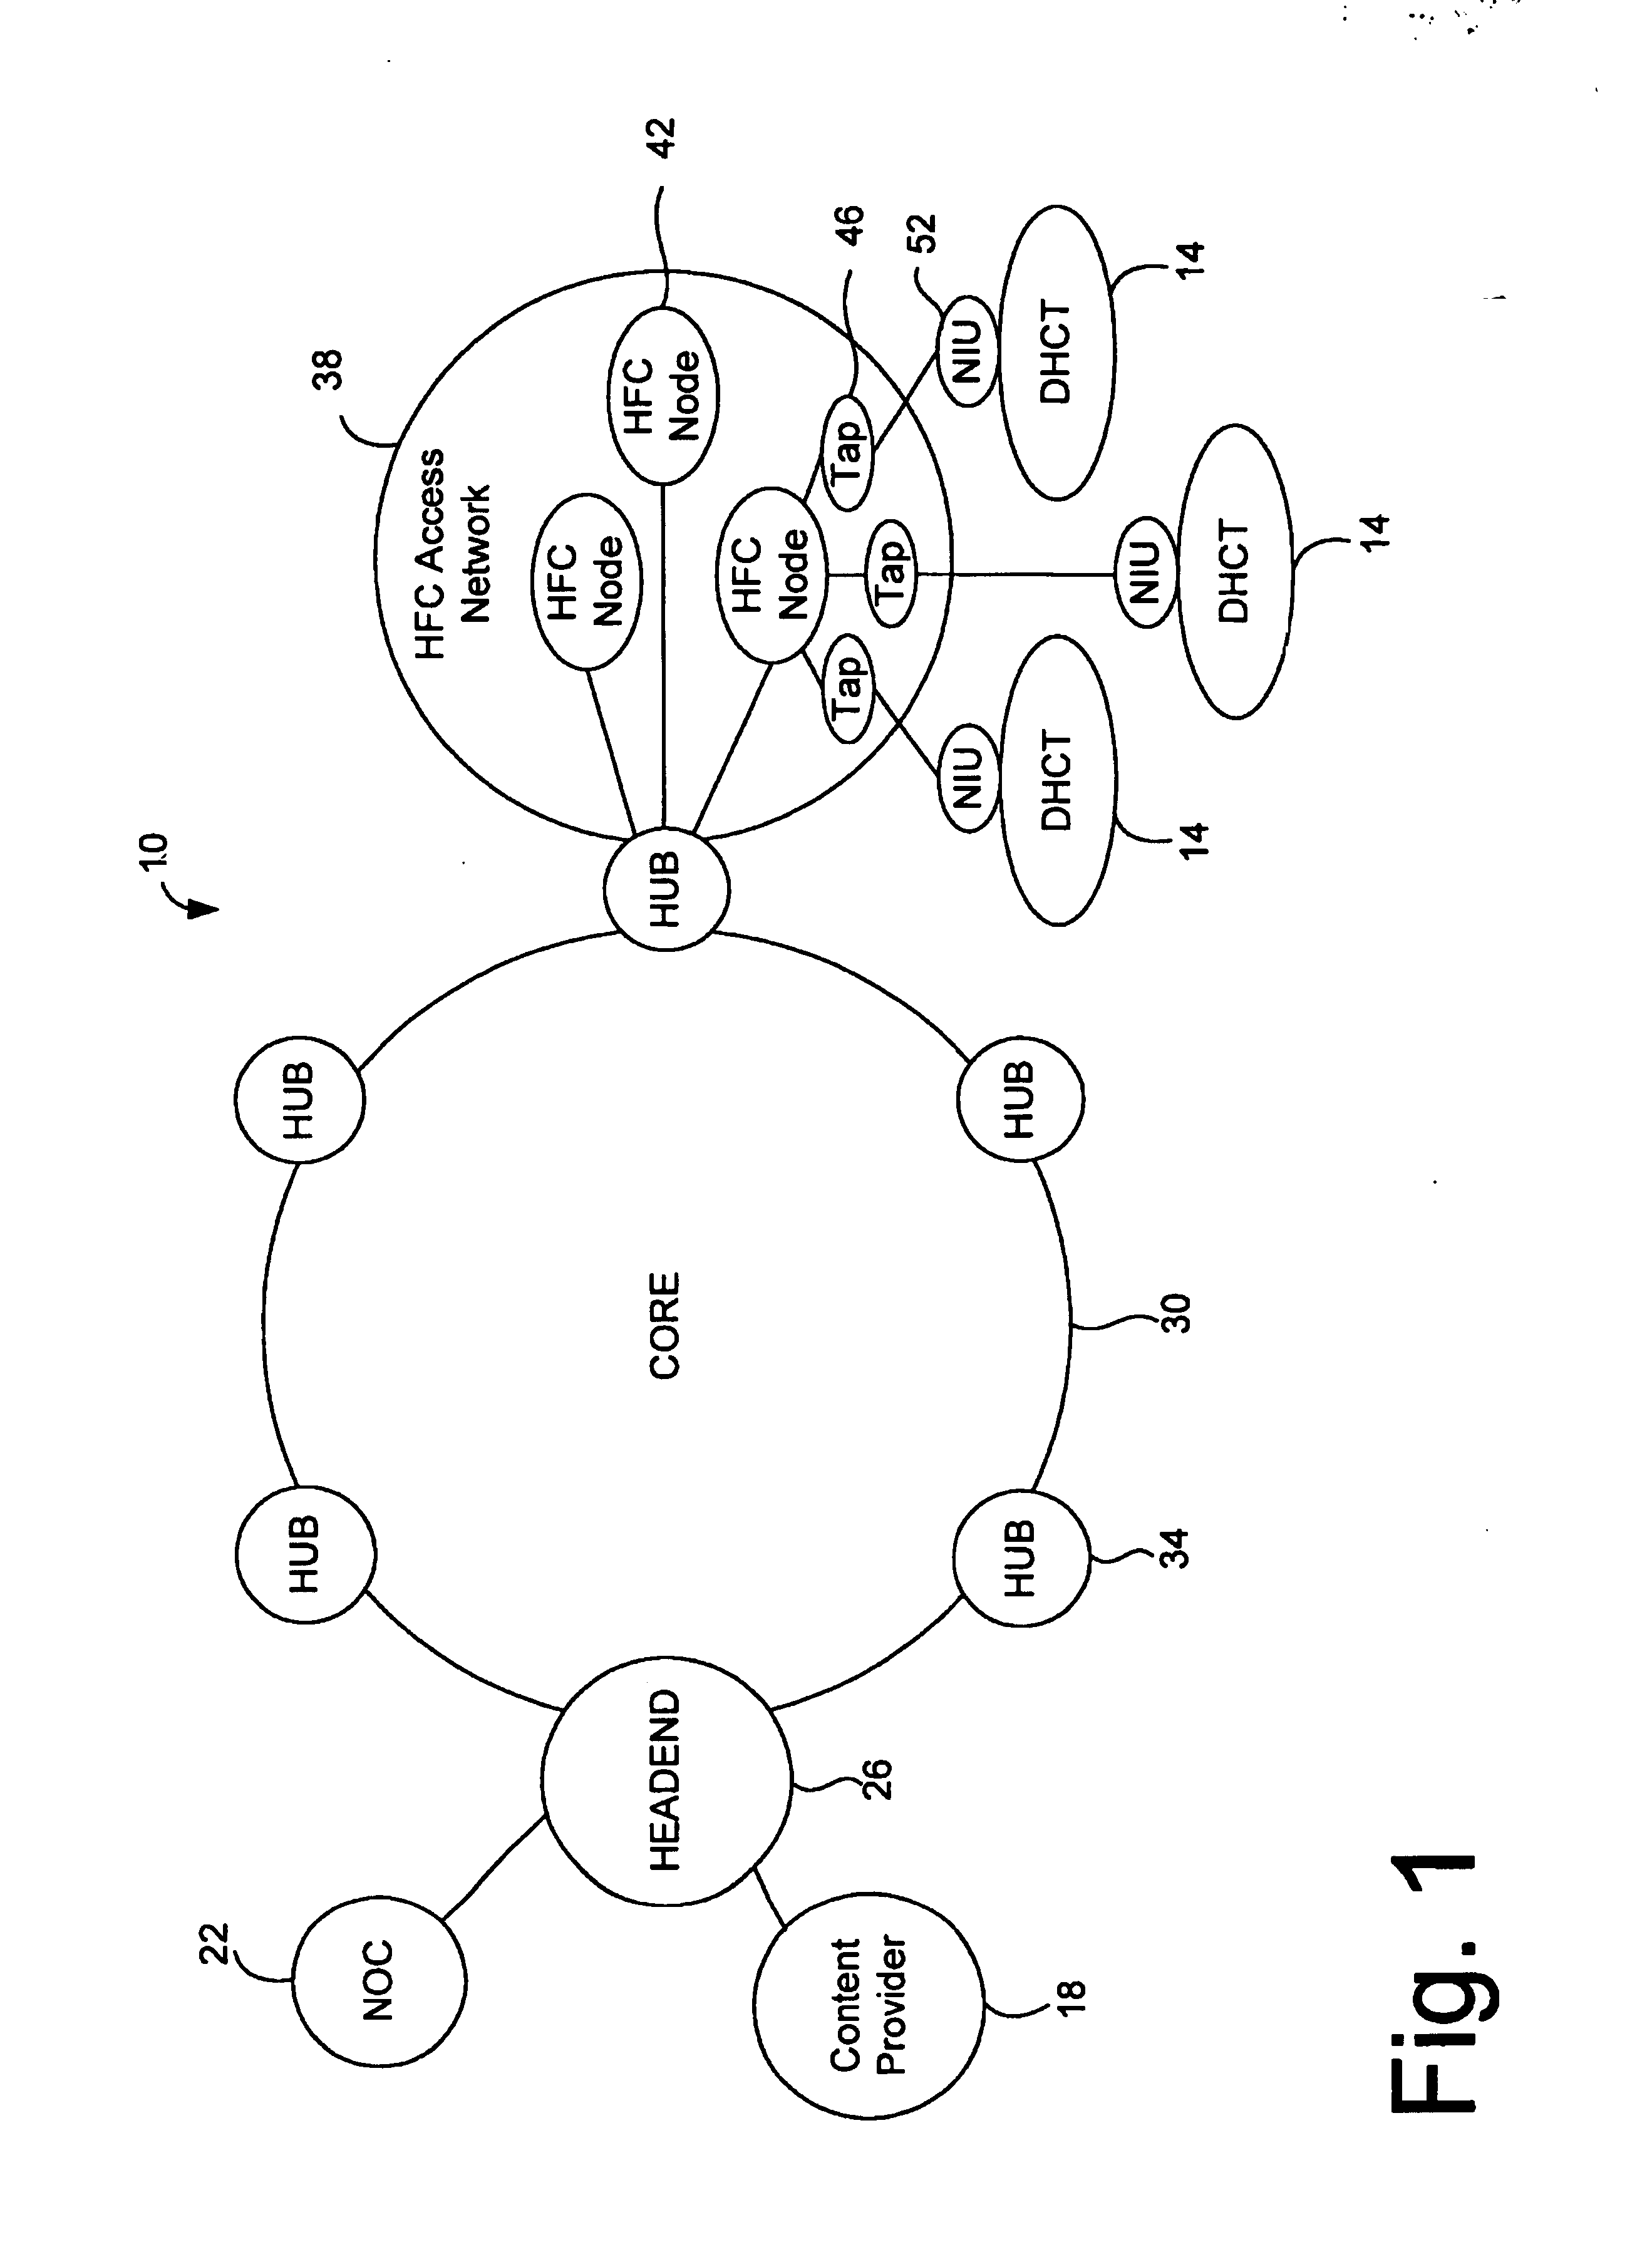 Systems and methods for adaptive scheduling and dynamic bandwidth resource allocation management in a digital broadband delivery system